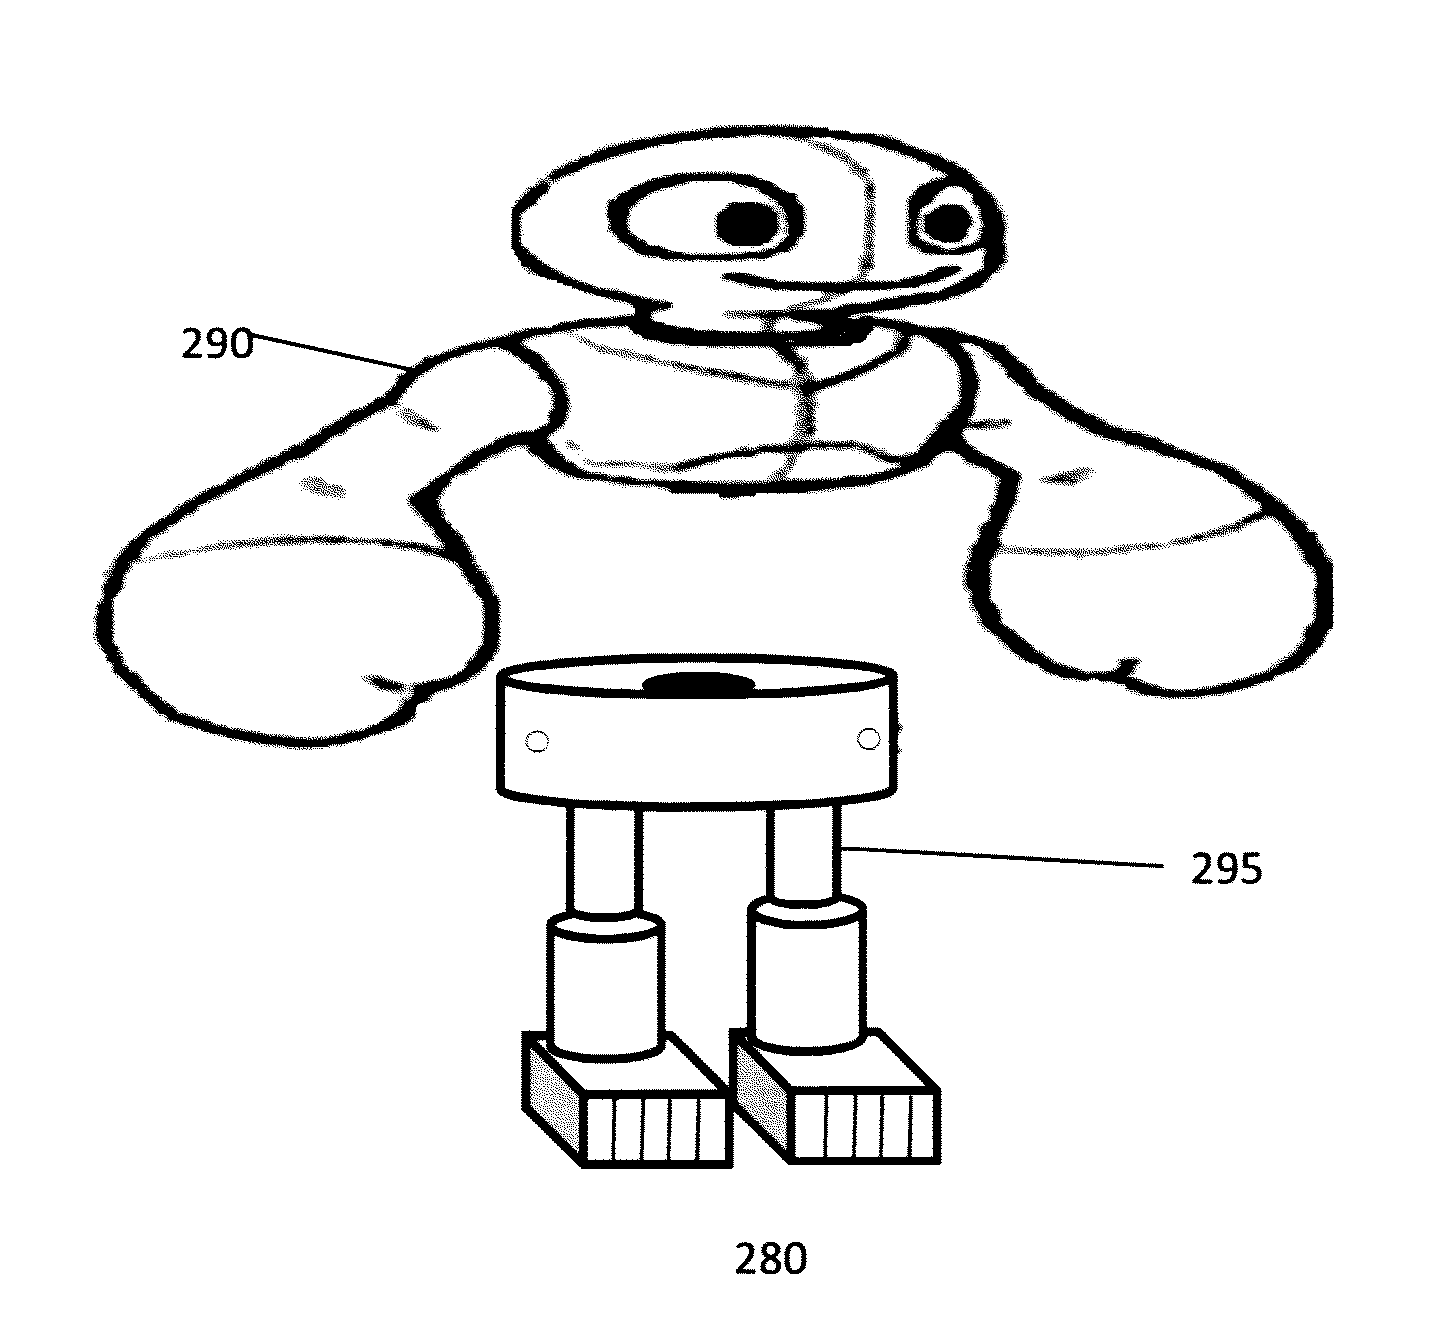 System and method for animating virtual characters